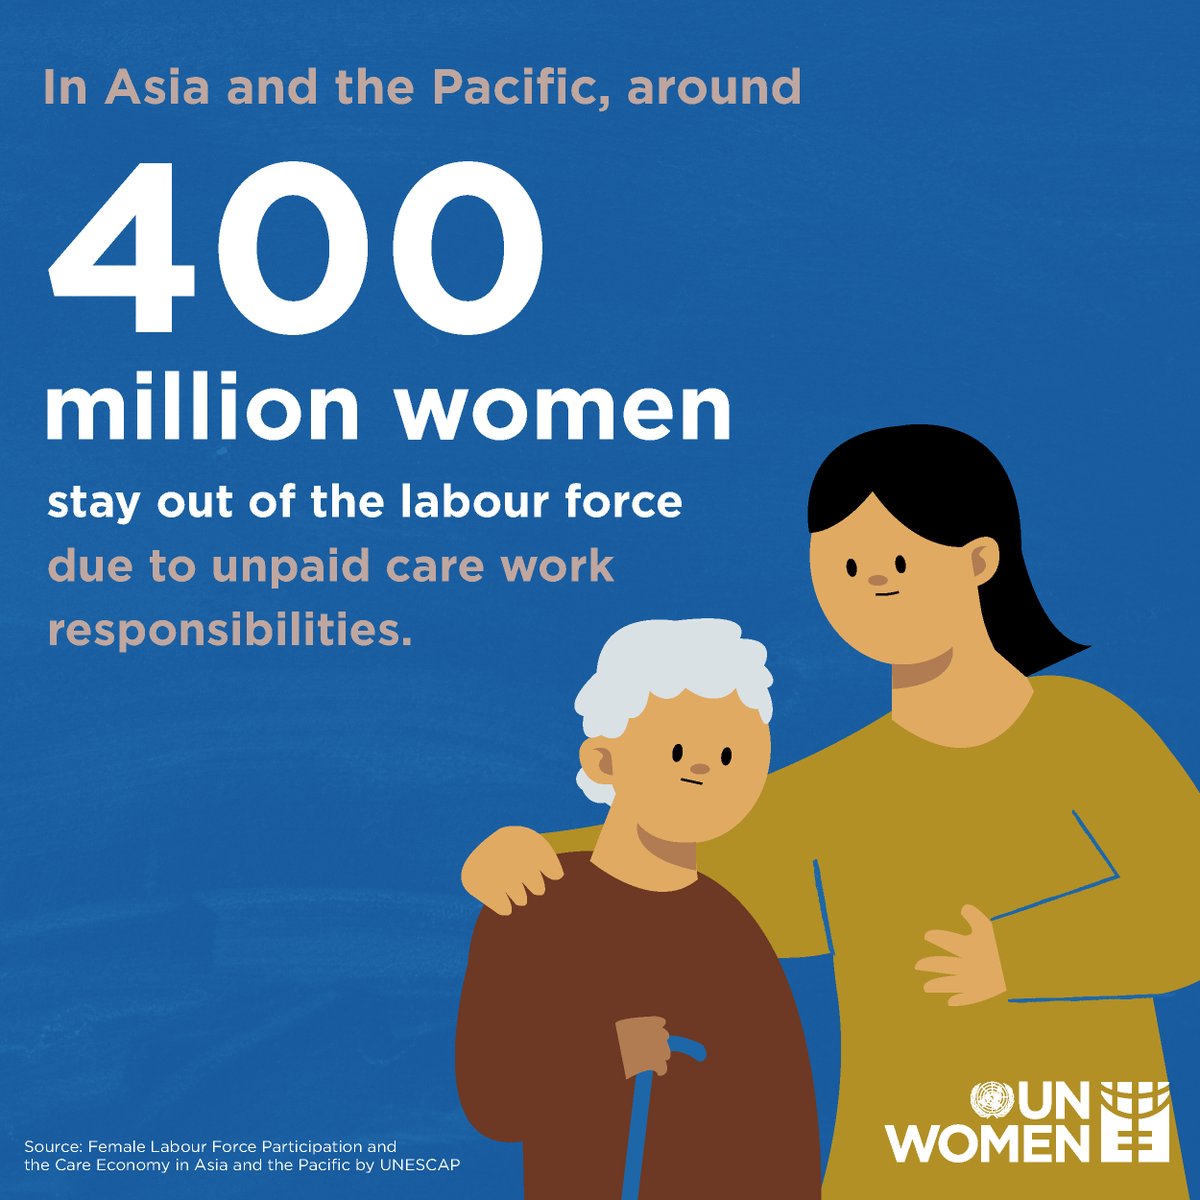 In Asia and the Pacific, women do four times more unpaid care work than men. This leaves women with little time to engage in paid work, making them further invisible. On #LabourDay, join us in accelerating progress towards women's economic empowerment.